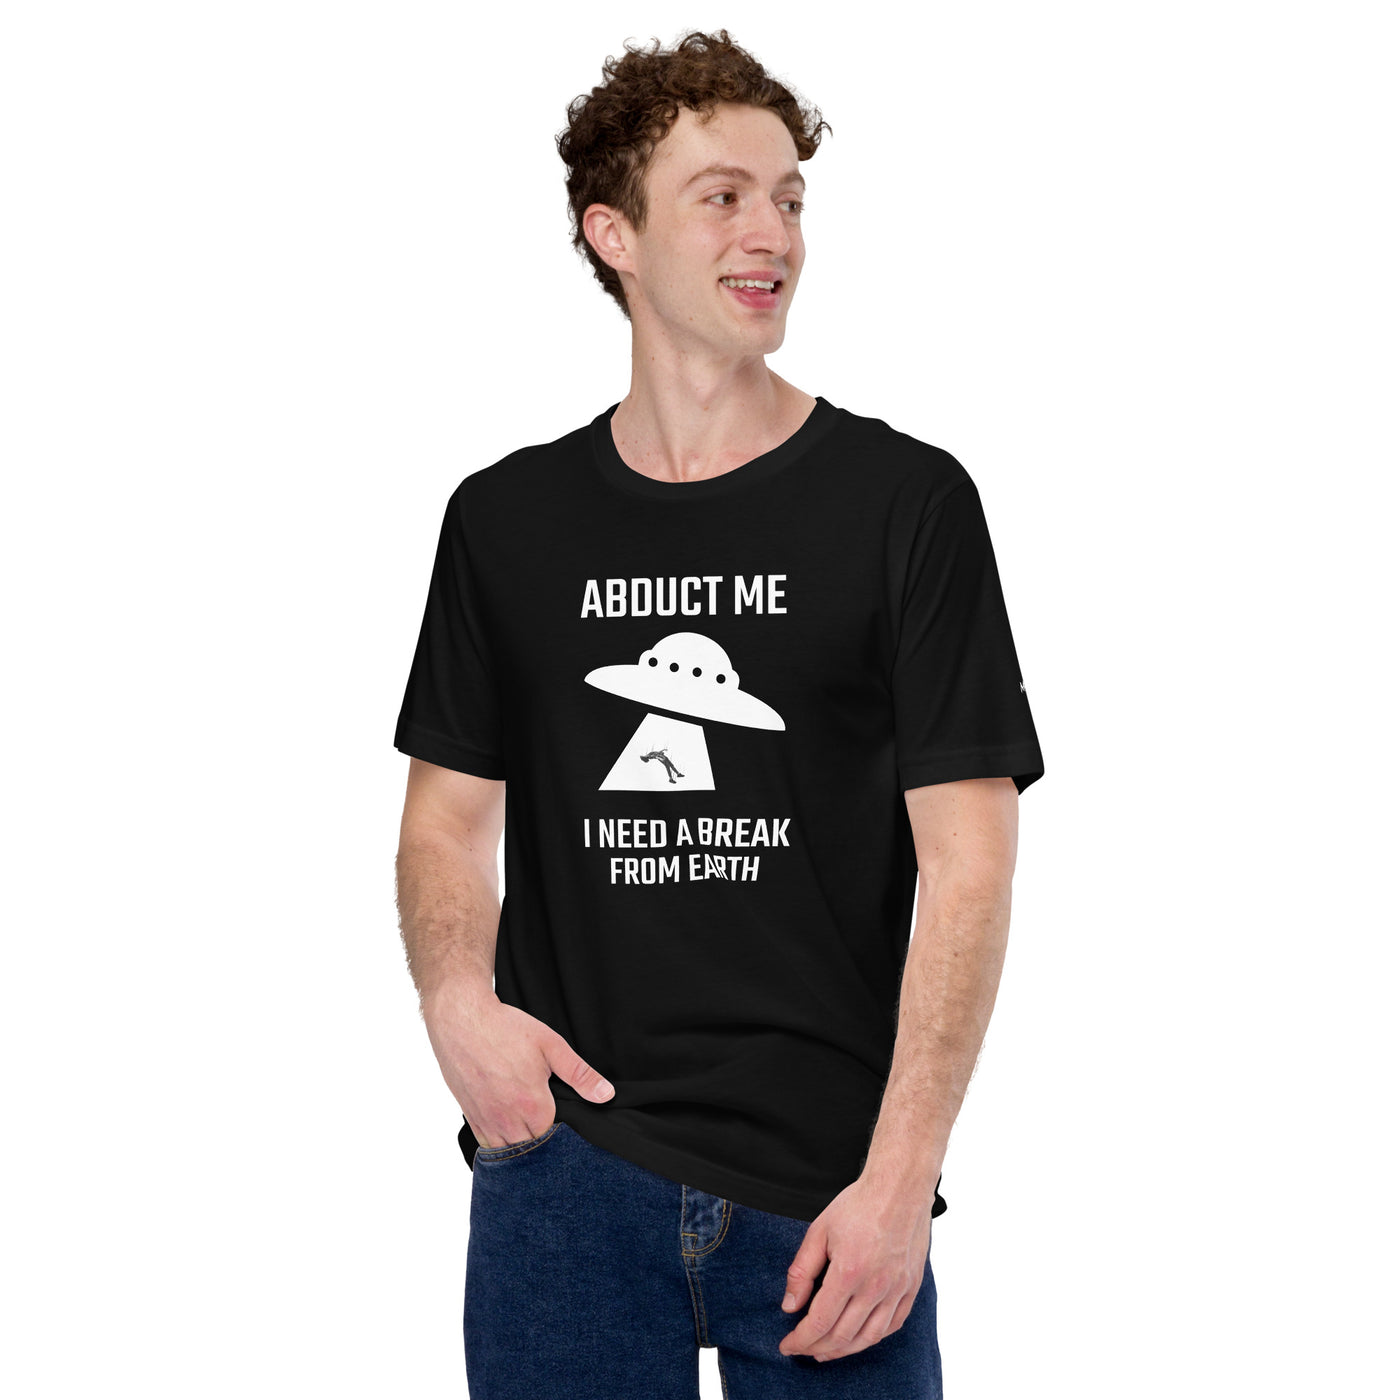 Abduct me I need a break from Earth v1 - Unisex t-shirt